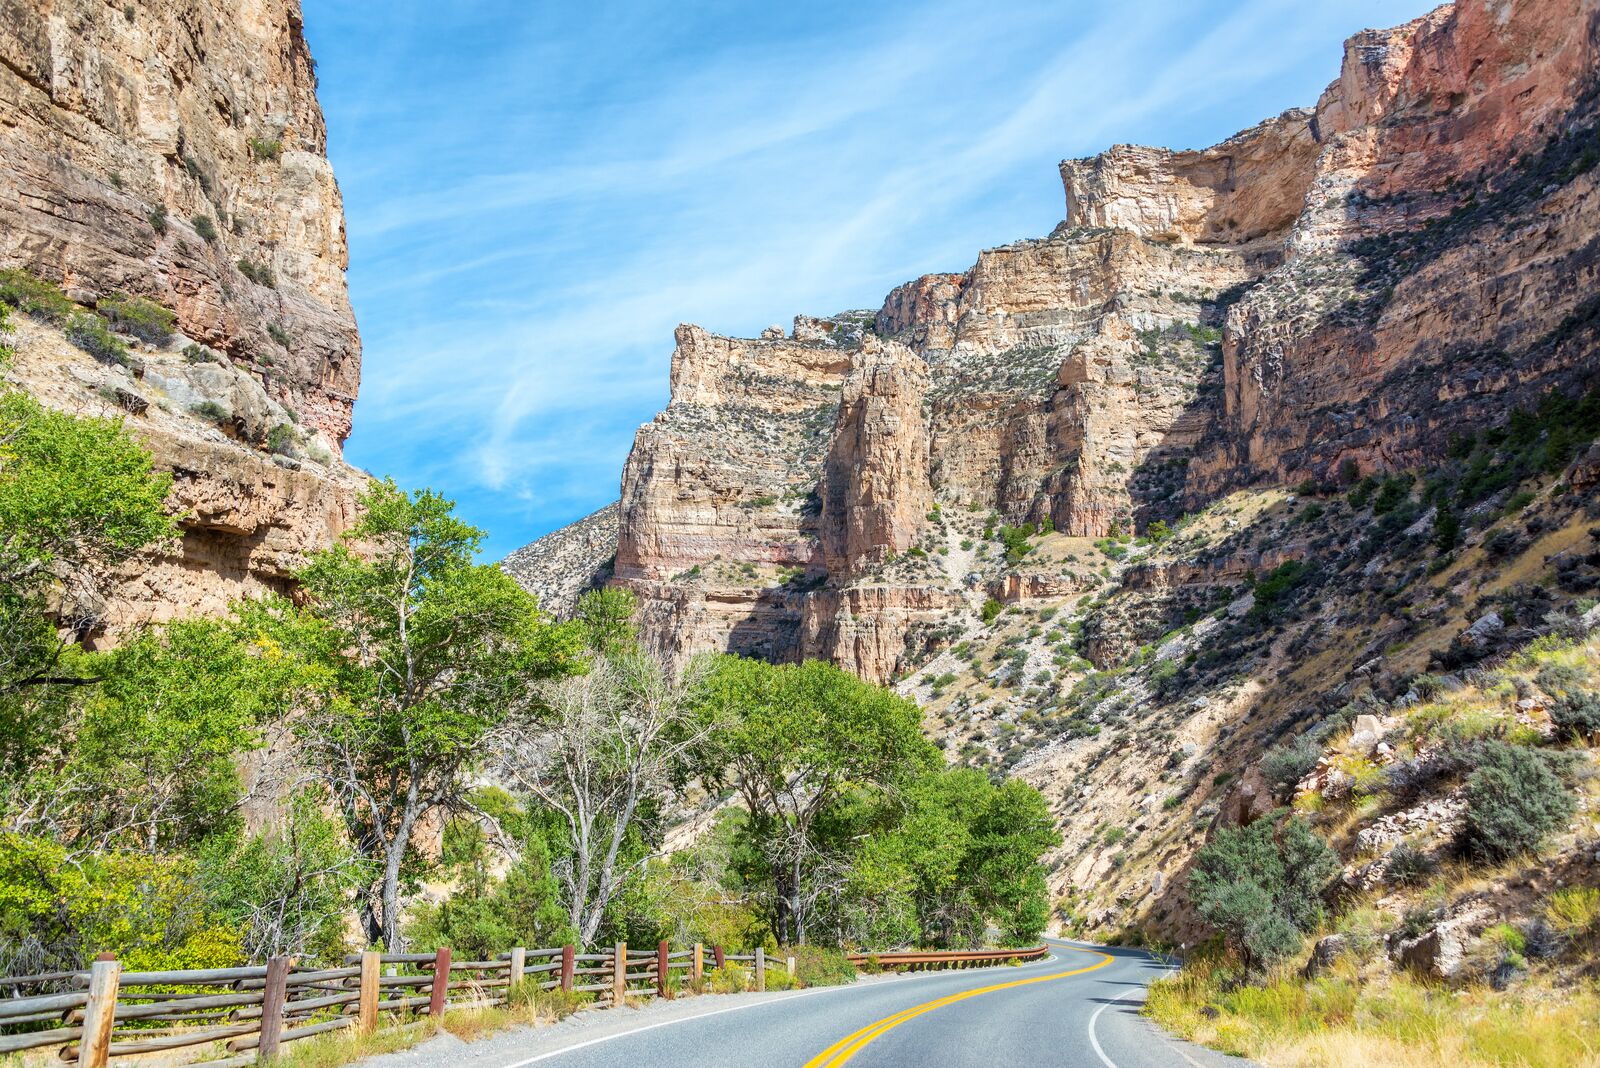 steepest highway grades in the US - shell canyon